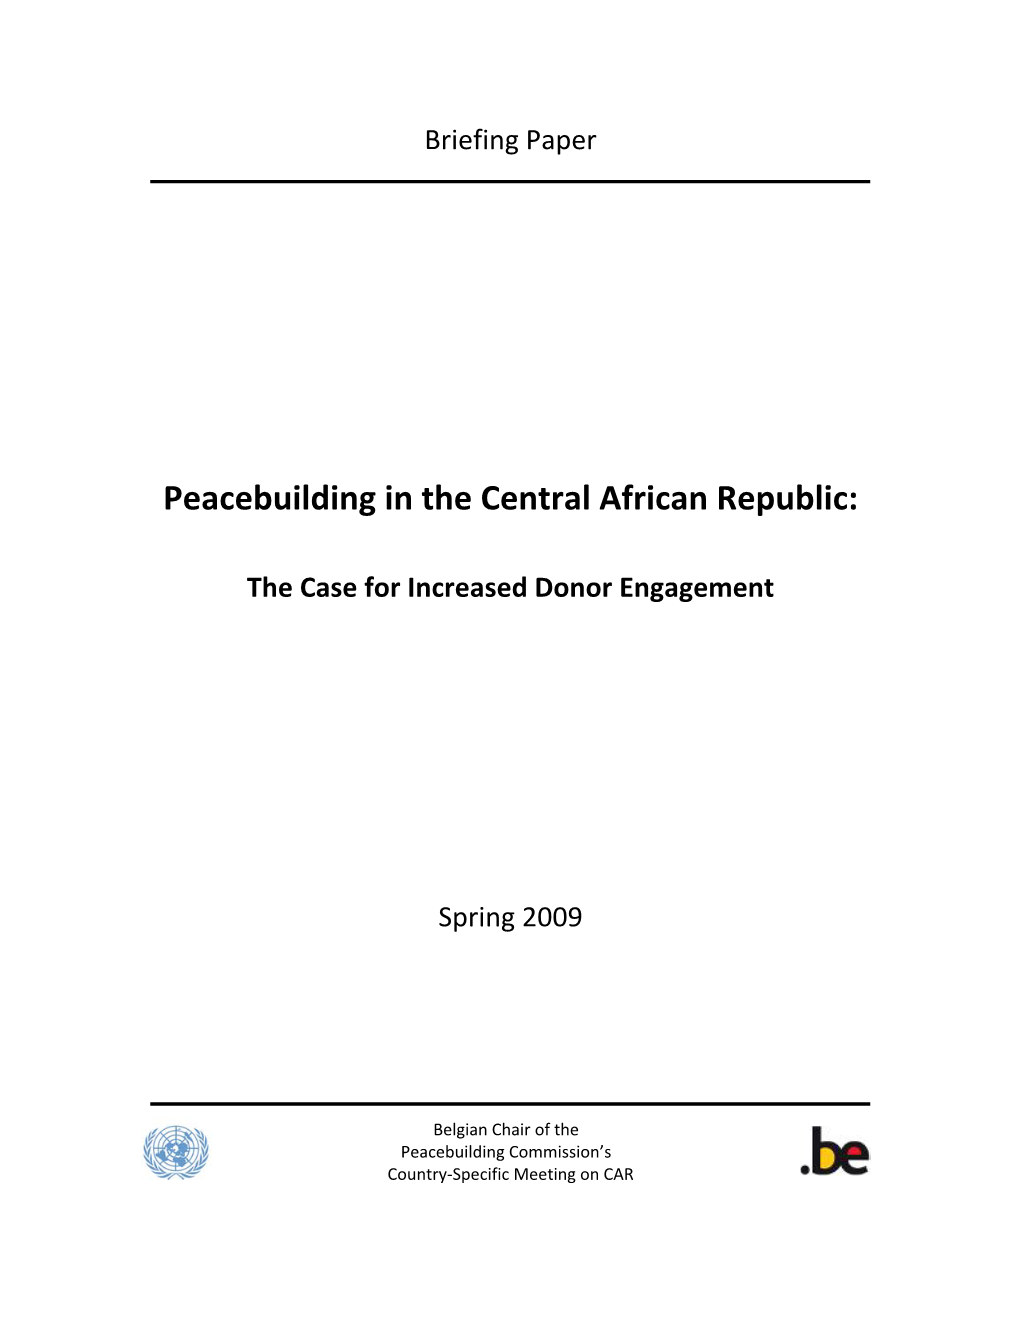 Peacebuilding in the Central African Republic